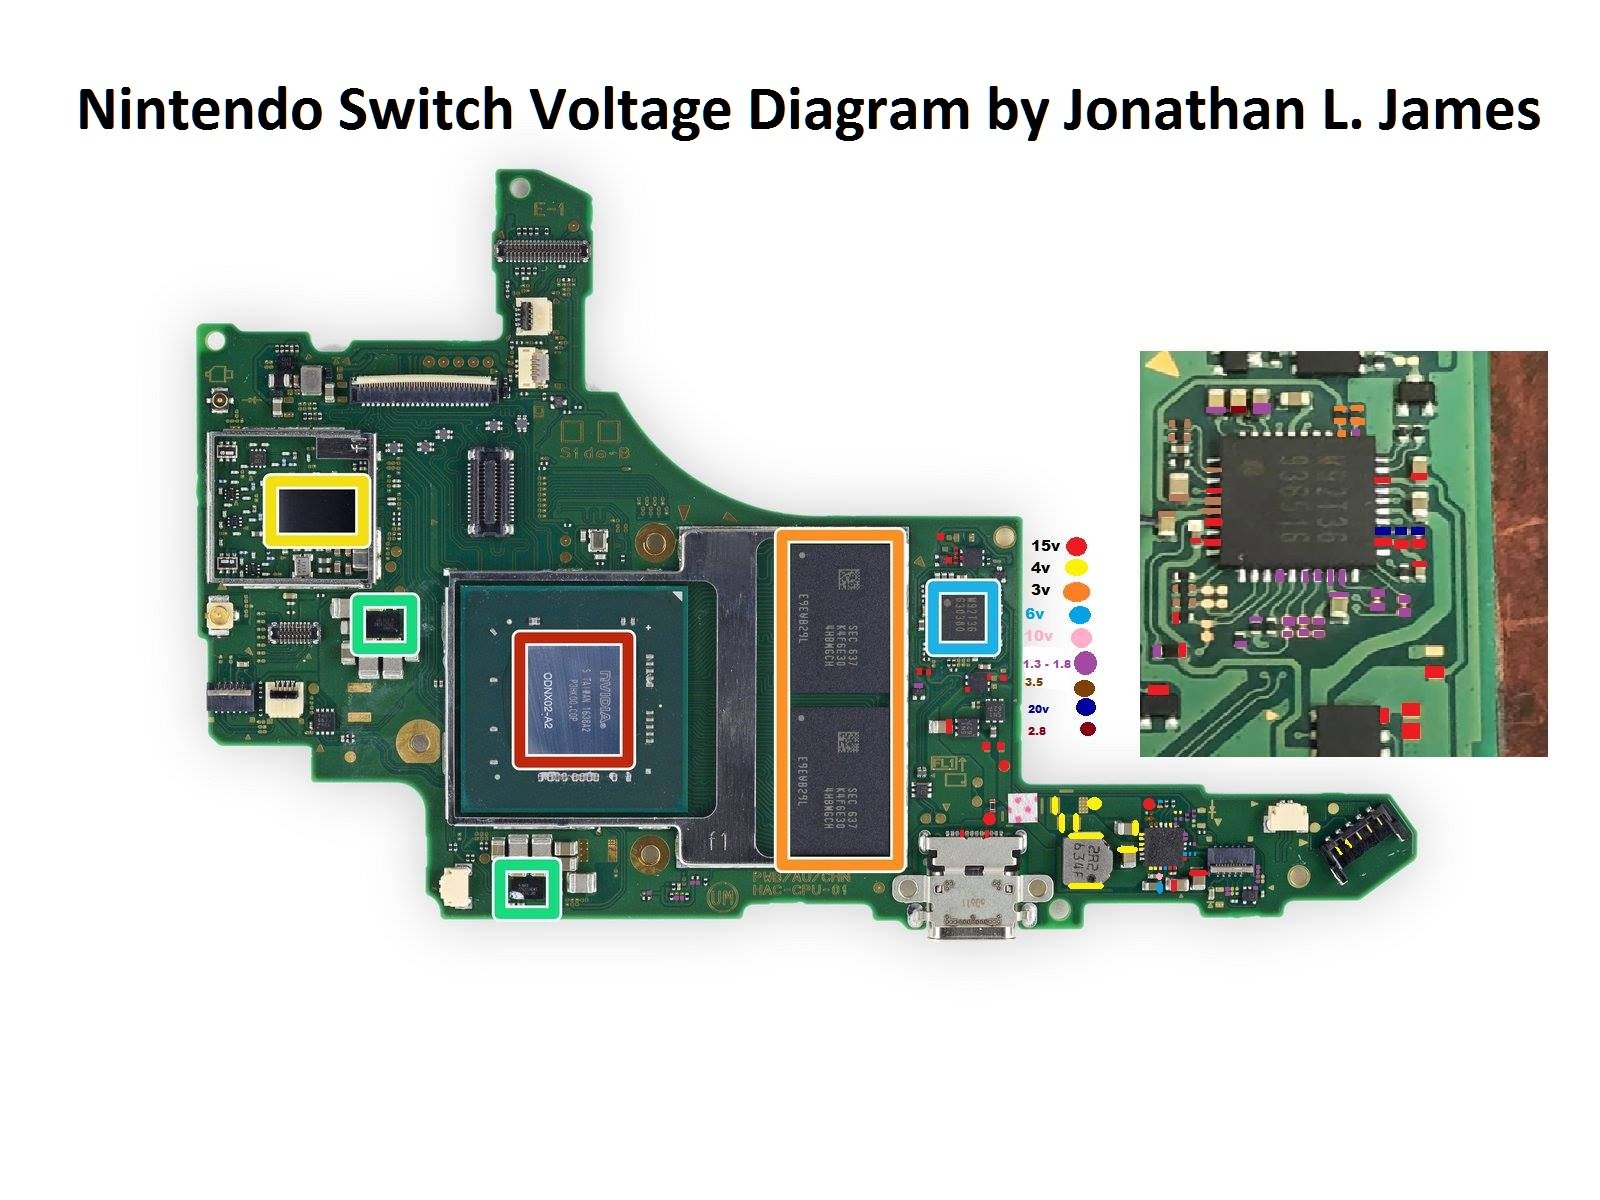 Switch Diagram | GBAtemp.net - The Independent Video Game Community